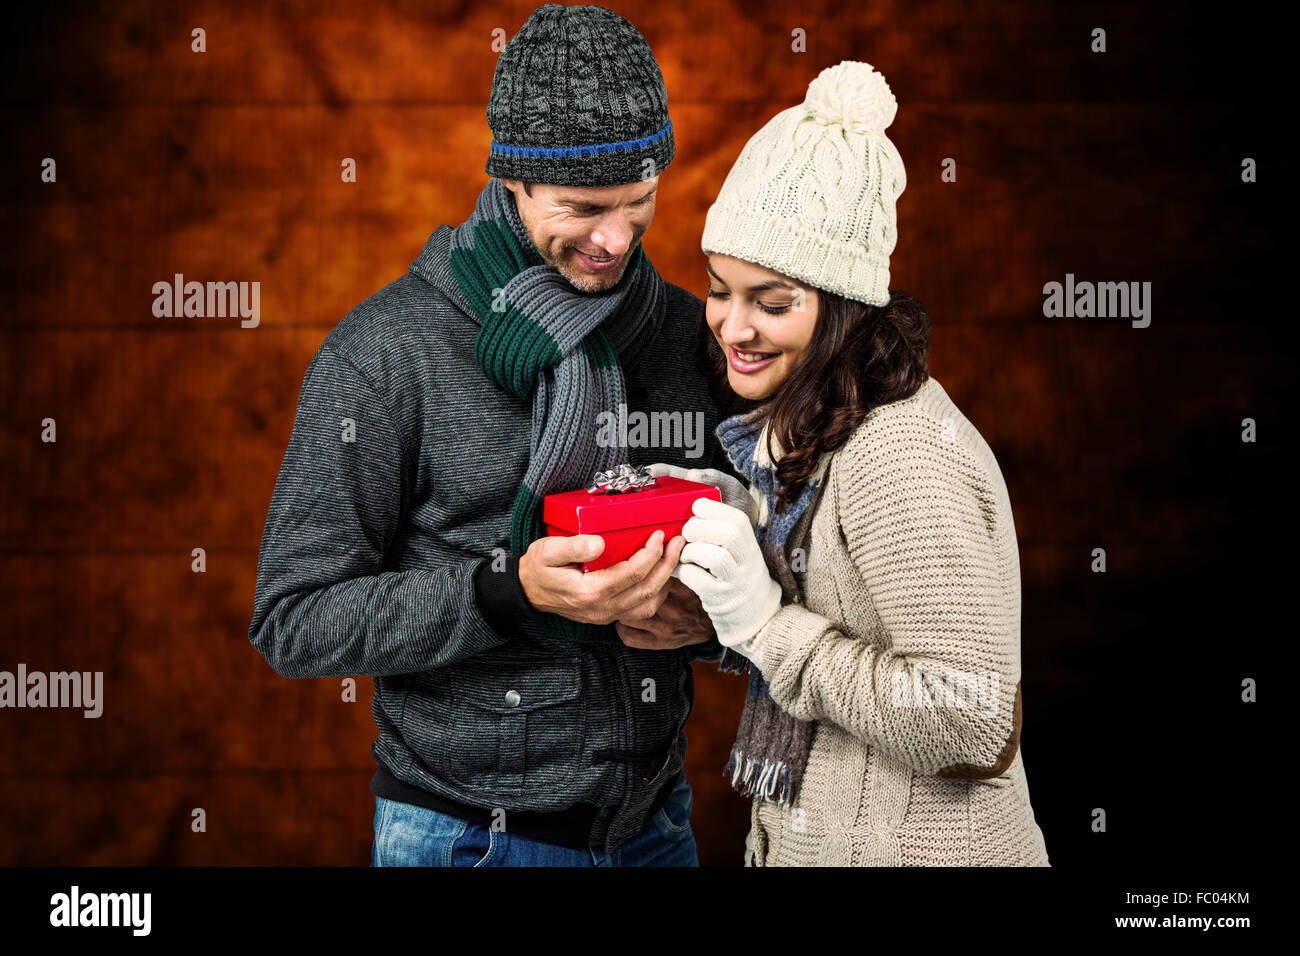 Composite image of festive couple exchanging a gift Stock Photo